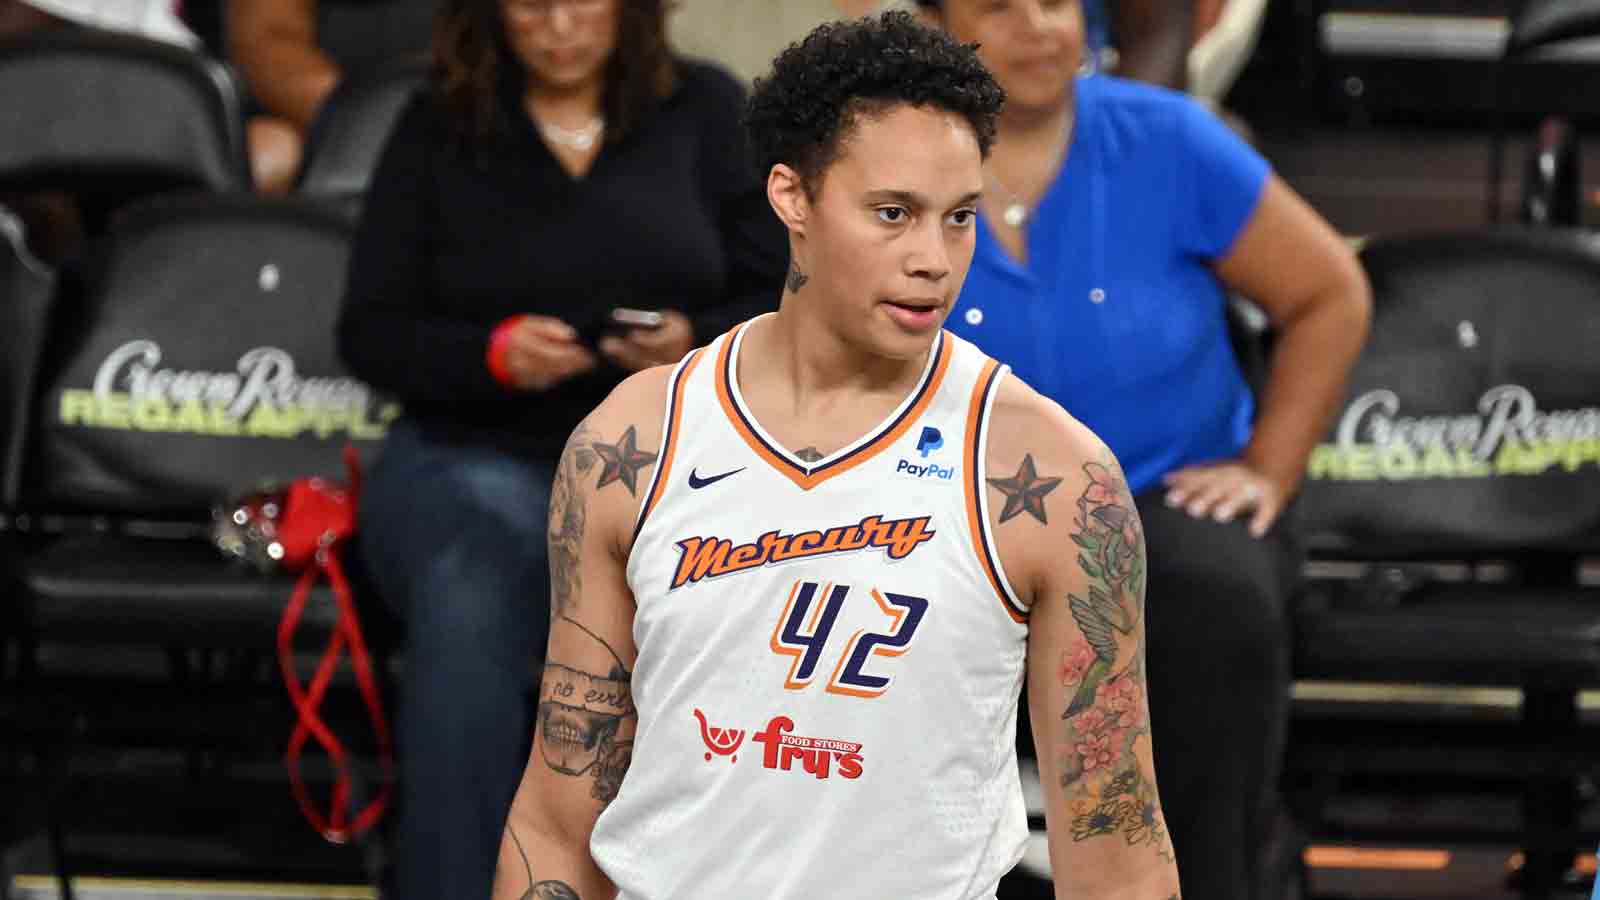 Brittney Griner scores 18 points in unbelievable return to the WNBA   NBAcom